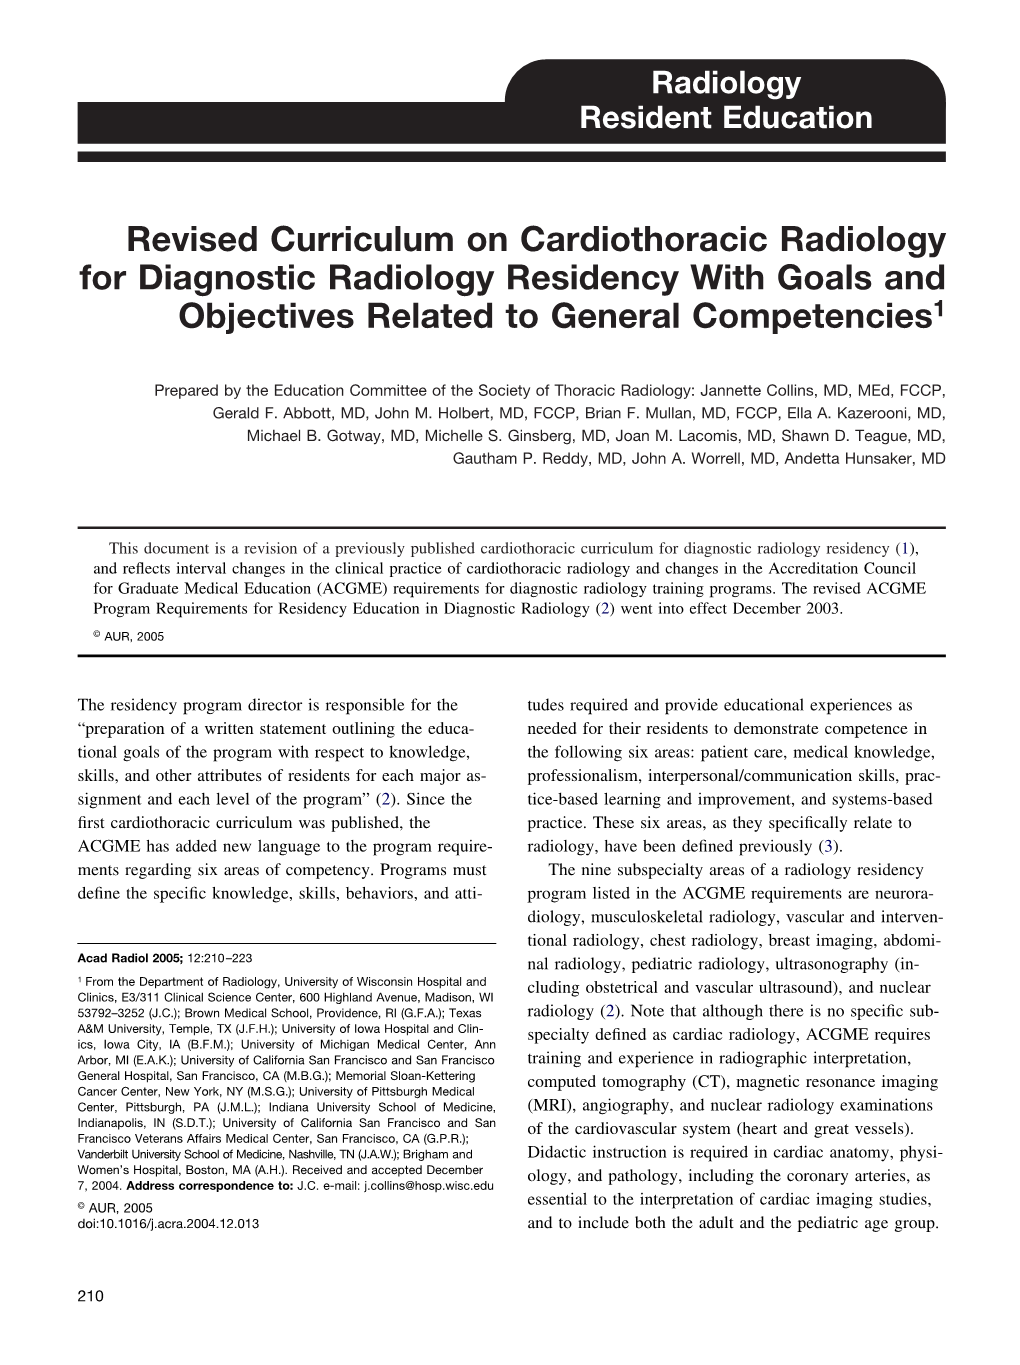 Revised Curriculum on Cardiothoracic Radiology for Diagnostic Radiology Residency with Goals and Objectives Related to General Competencies1